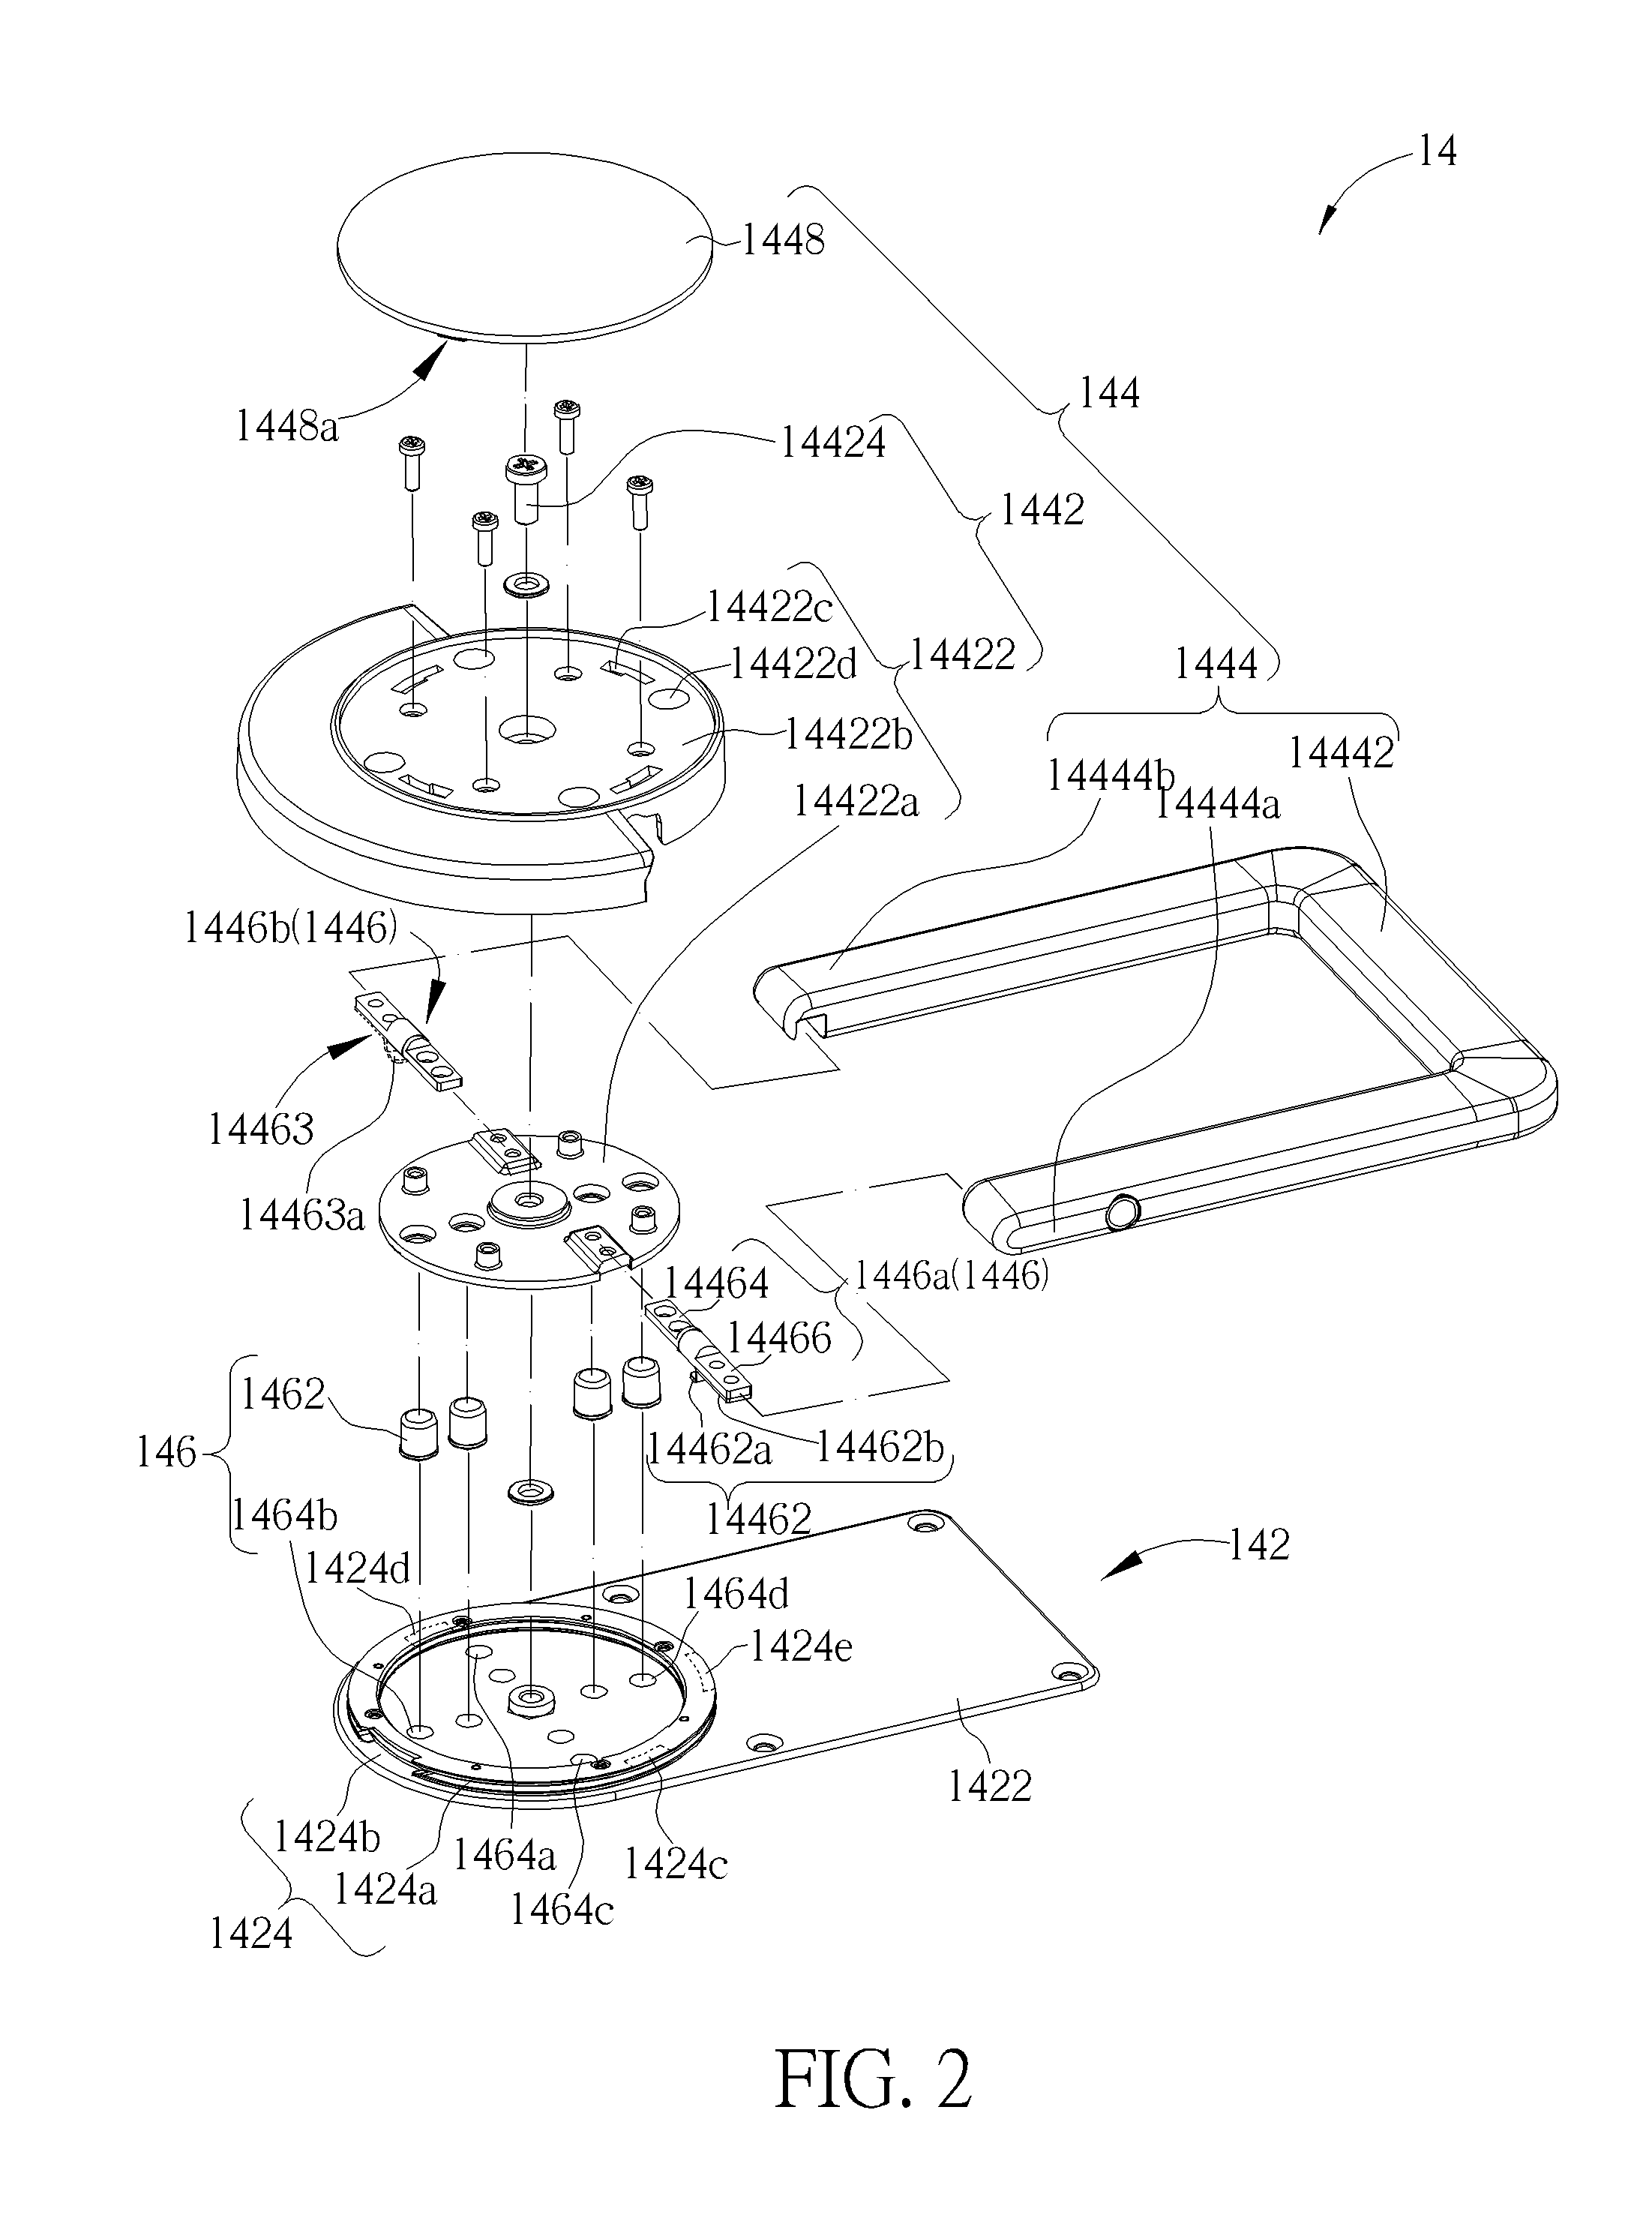 Display with a supporting mechanism